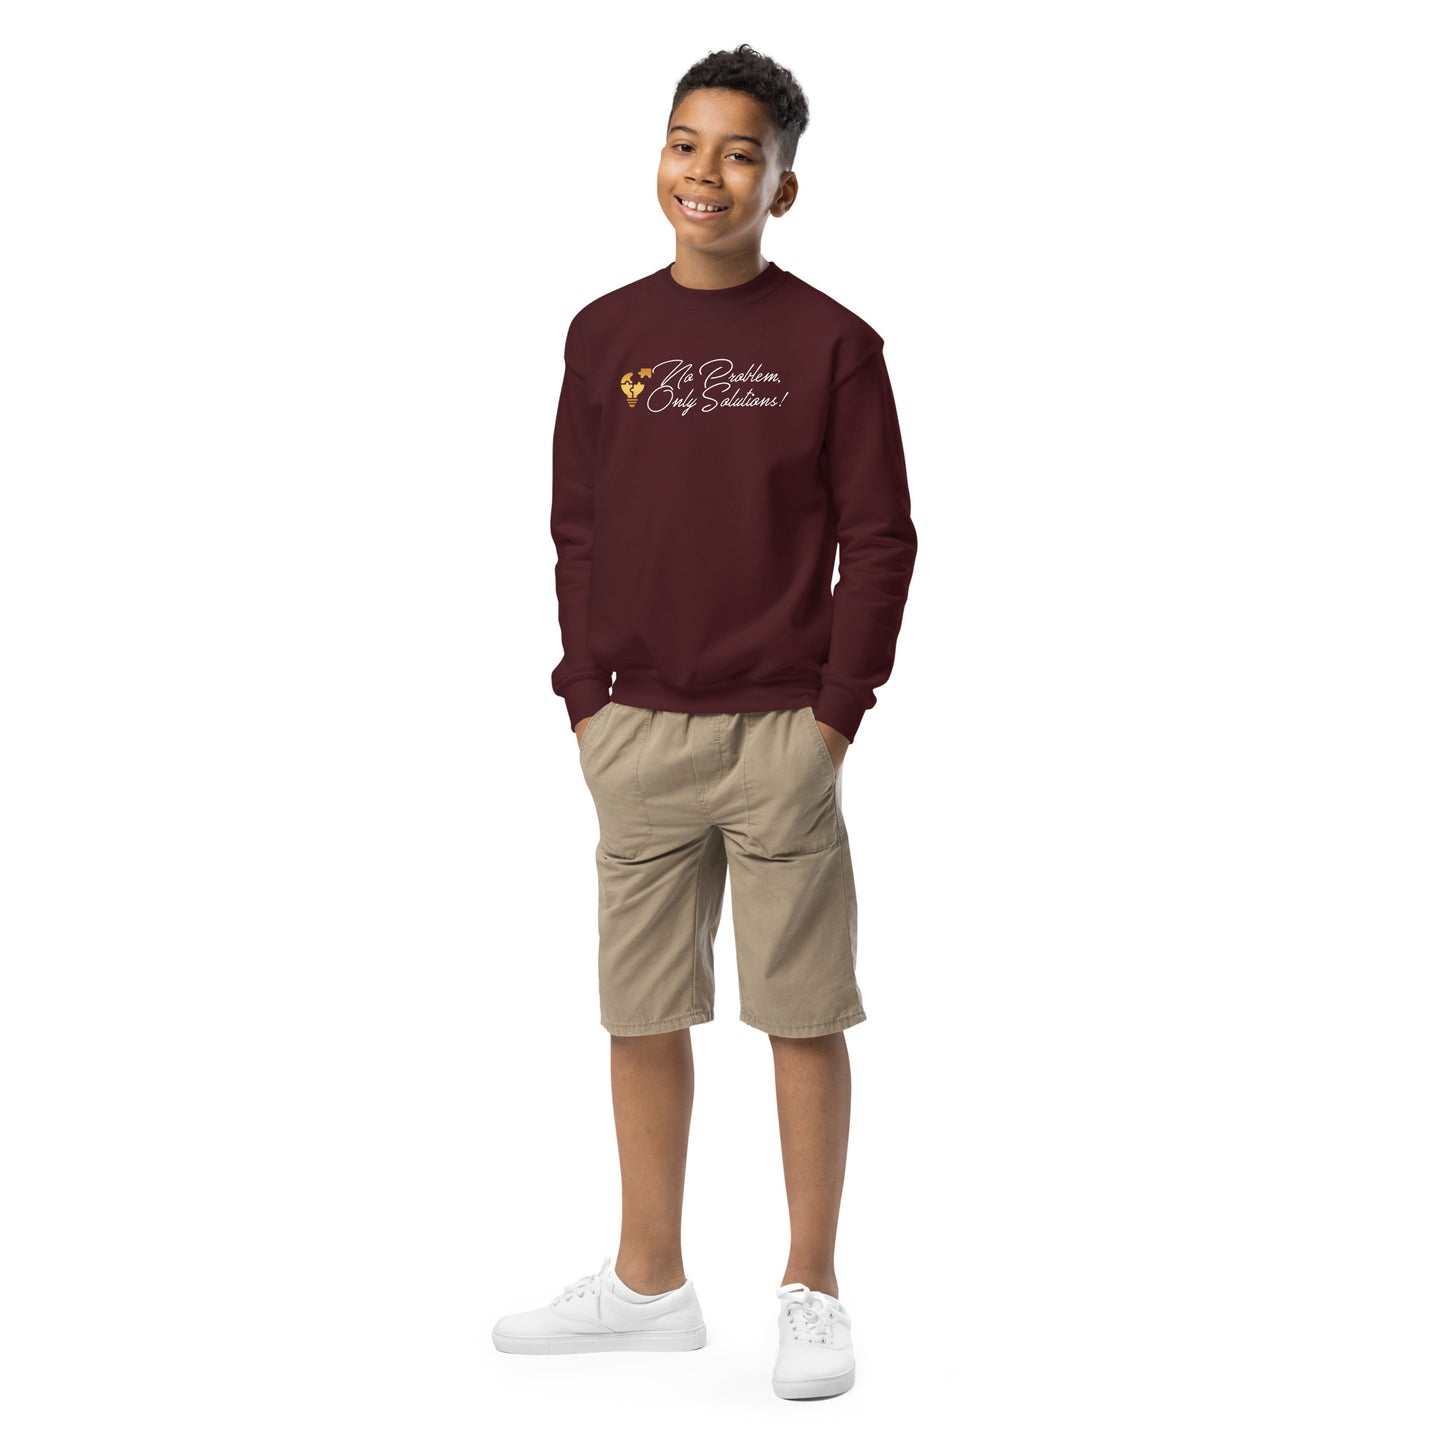 Only Solution Youth sweatshirt